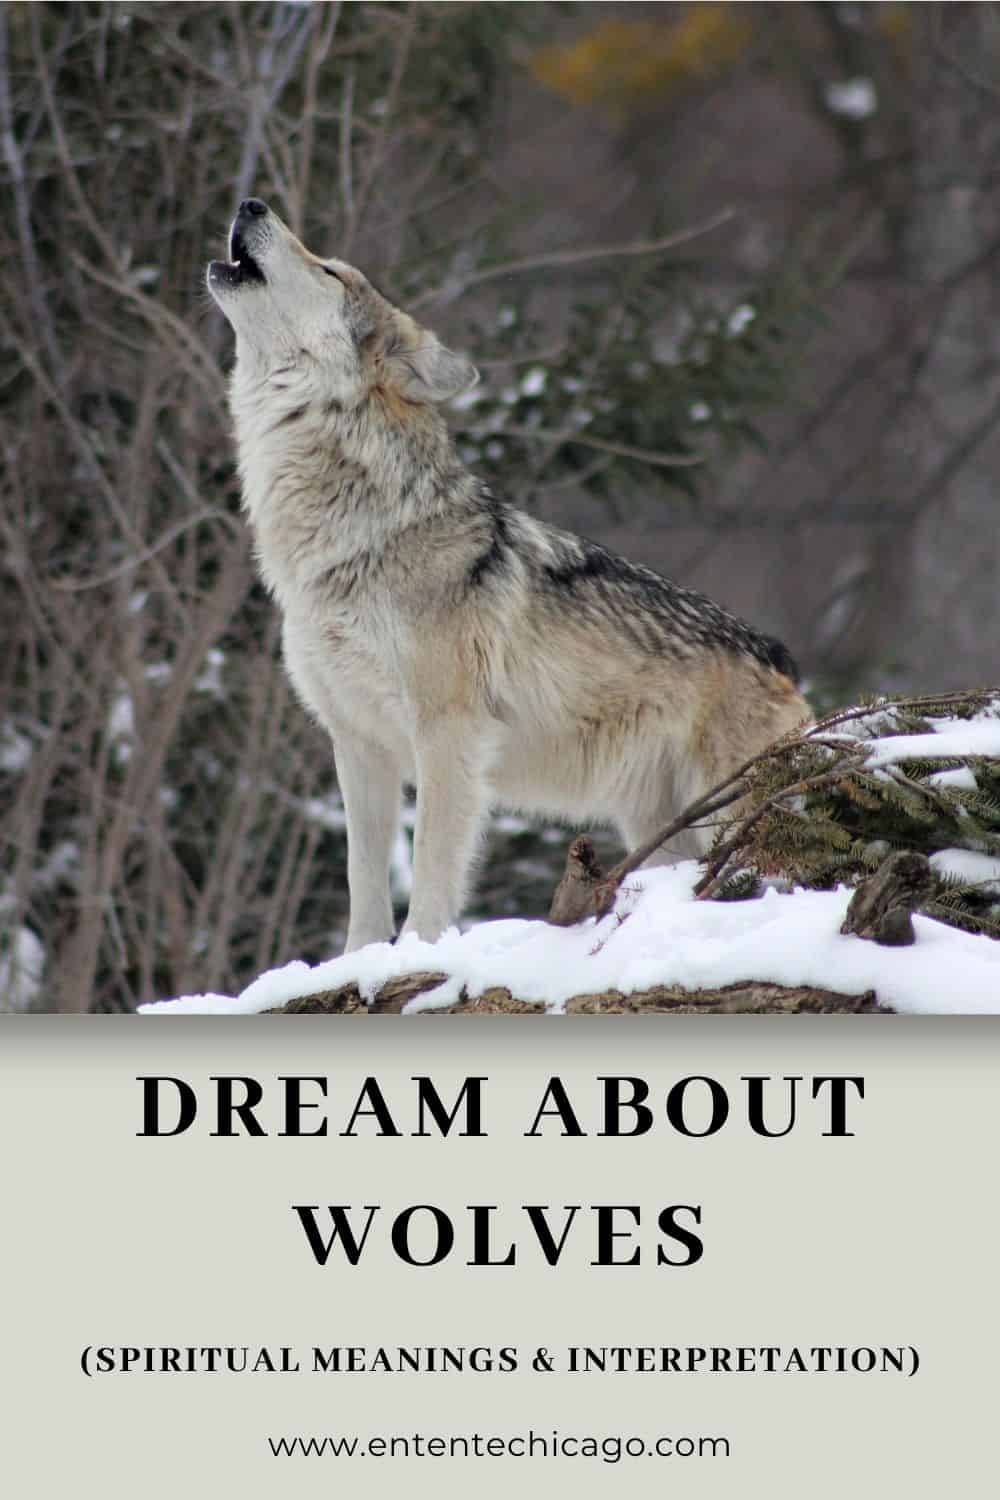 Dream About Wolves (Spiritual Meanings & Interpretation)